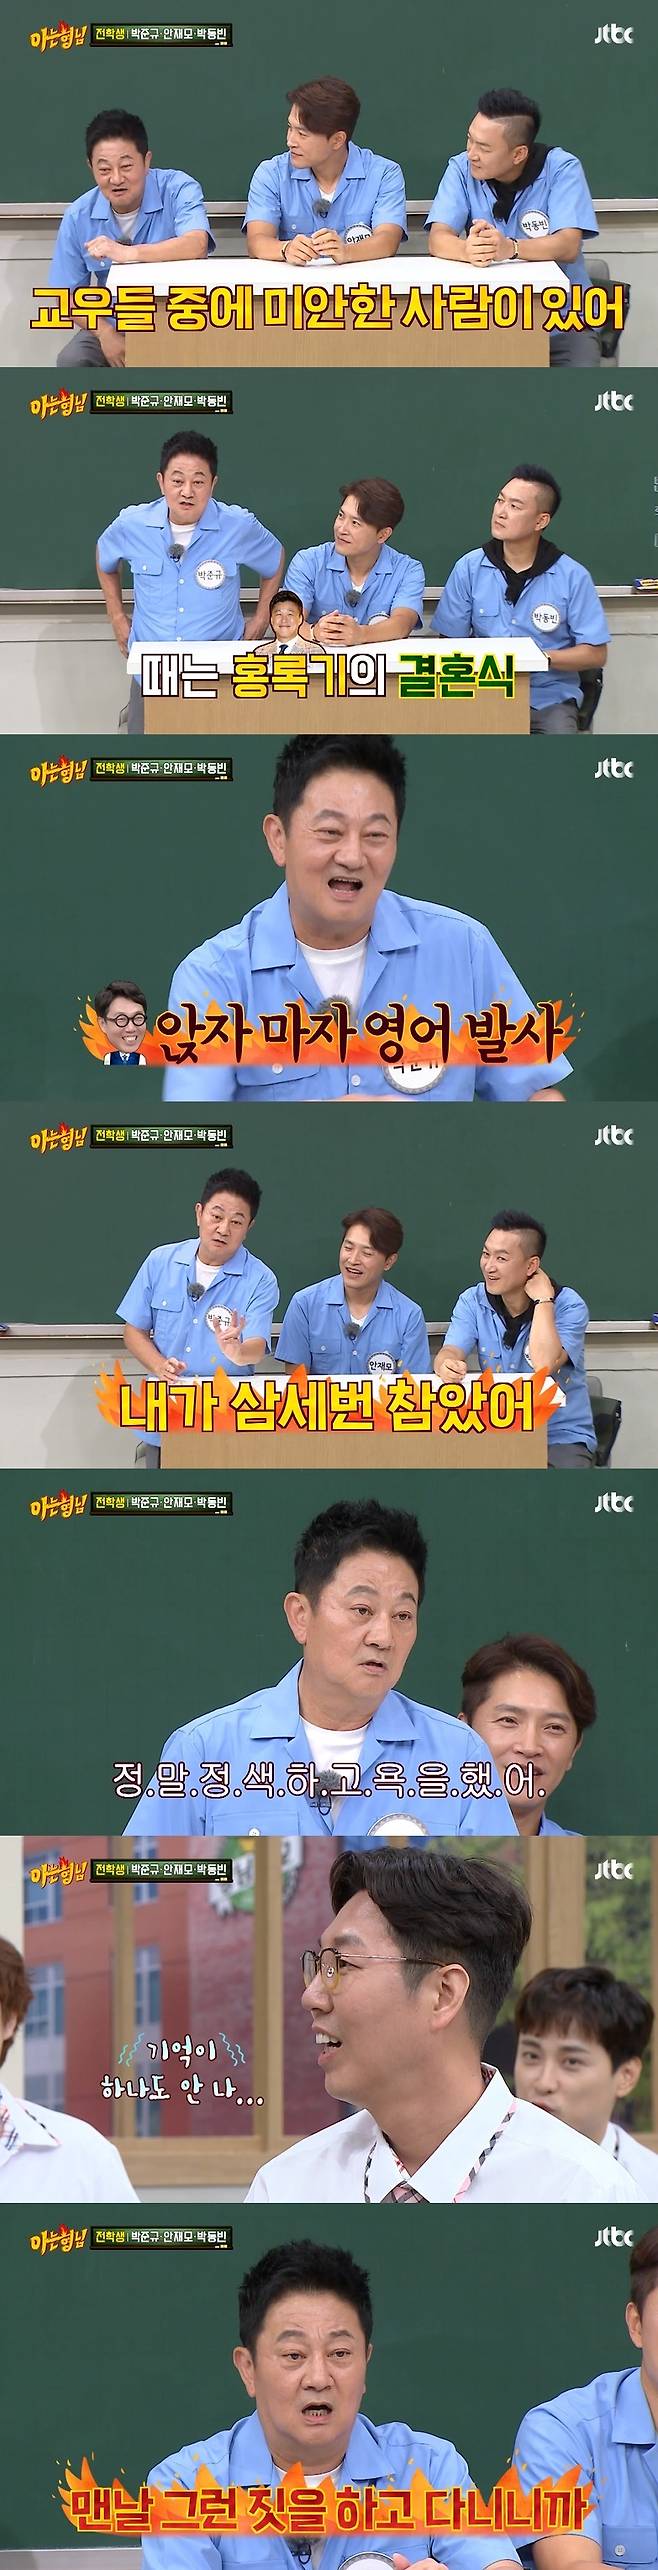 Park Jun-gyu has revealed the story of his swearing at Kim Young-chul.On July 31, JTBC Knowing Bros, Park Jun-gyu apologized to Kim Young-chul late.Park Jun-gyu wrote Im sorry once in a friendship relationship and apologized to Kim Young-chul.Park Jun-gyu said, That was the Hong Rok-gi marriage ceremony, which was unprecedented, and I decided to give a congratulatory speech in the middle.I went to tell you something good, but there were all the best celebrities at the time. I had to give a speech there, but I did not take out a note and read it.When Kim Young-chul appeared, his brothers lamented, I draw a picture roughly. Park Jun-gyu said, How much did you care to tell this child a good story?I sat down and said, Sit next to you. I was talking in English, and I kept talking, and I said, I have to go up and give a speech for a minute.I told him not to do it three times calmly. I forgot to memorize it, so I was really straight and swearing.It is a good day, he said, replaying the situation at the time.Kim Young-chul buried his face in his desk in embarrassment. Park Jun-gyu said, It was a mess up there.My wife said, I did too much for Mr. Young-chul. Young-chul was pissed off and went where.Im sorry for the straight, he said.